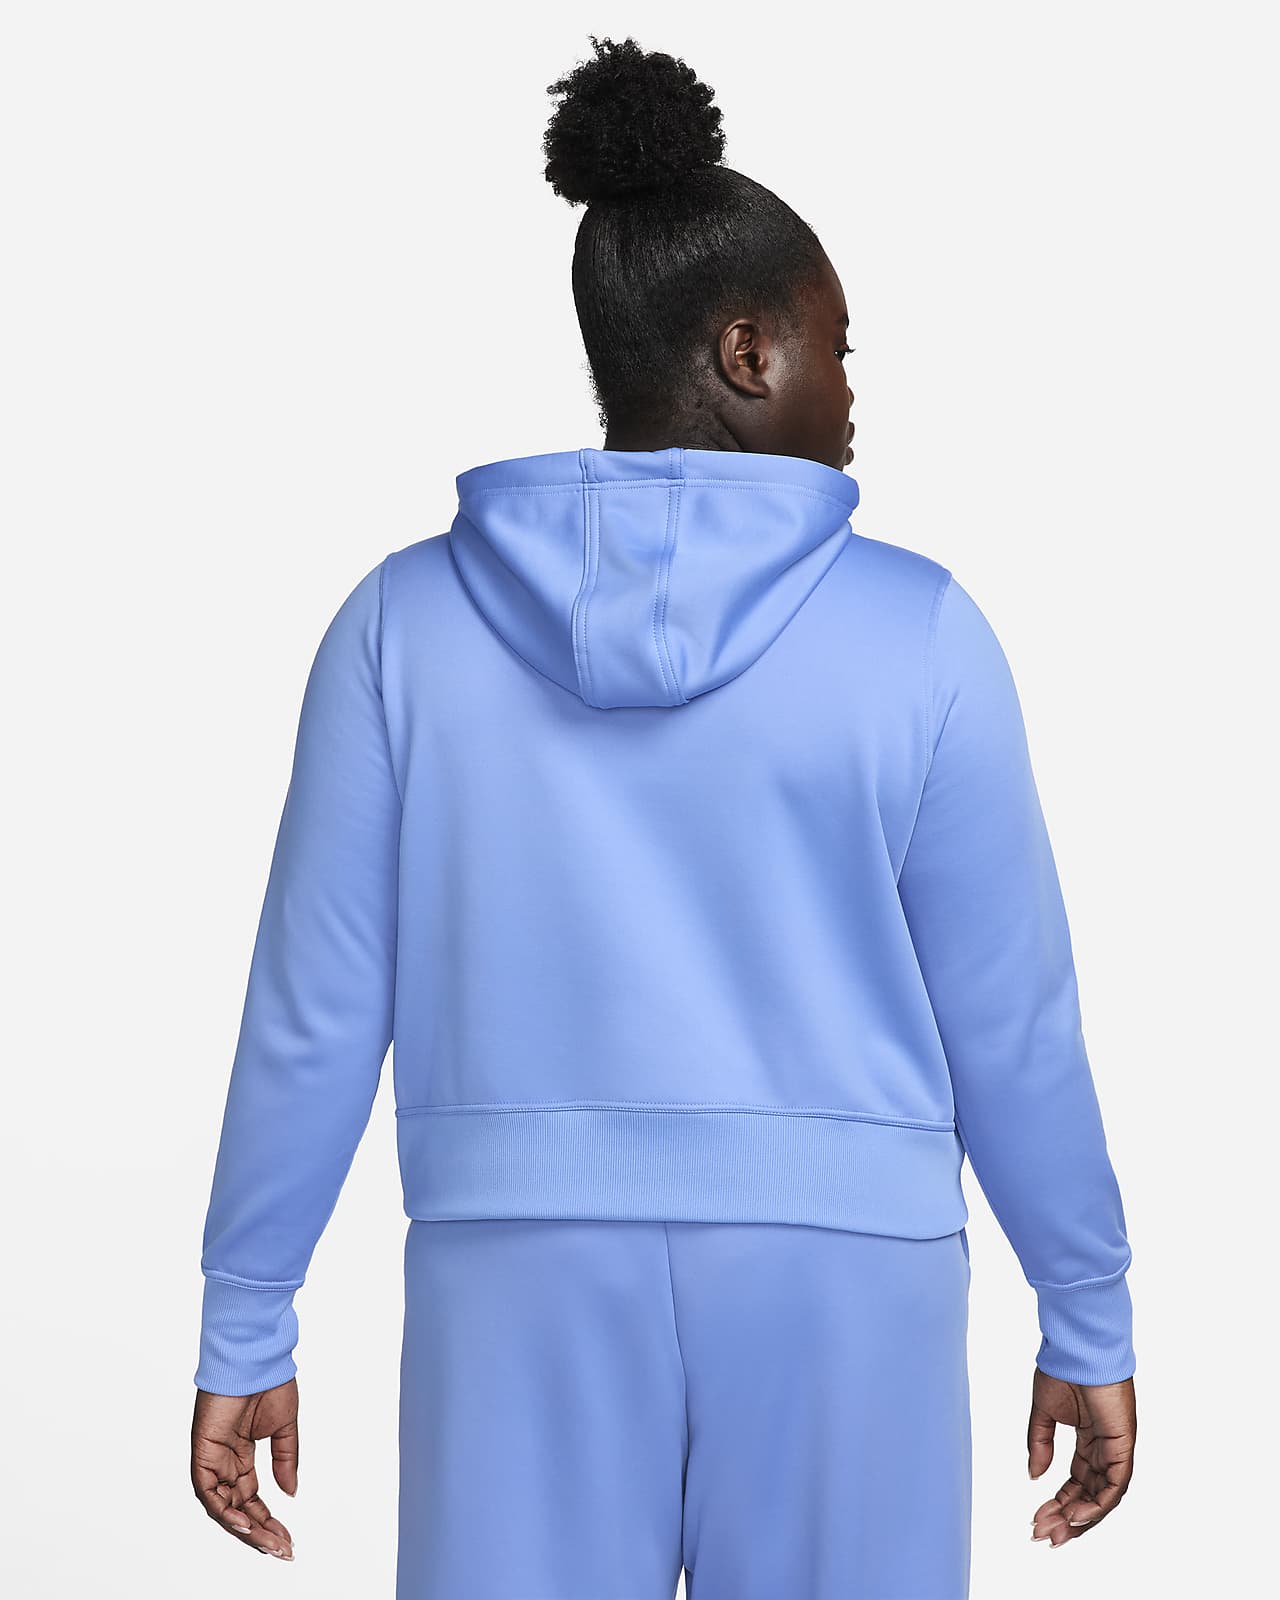 CARCOS Plus Size Hoodies for Women Solid Color Long Sleeve